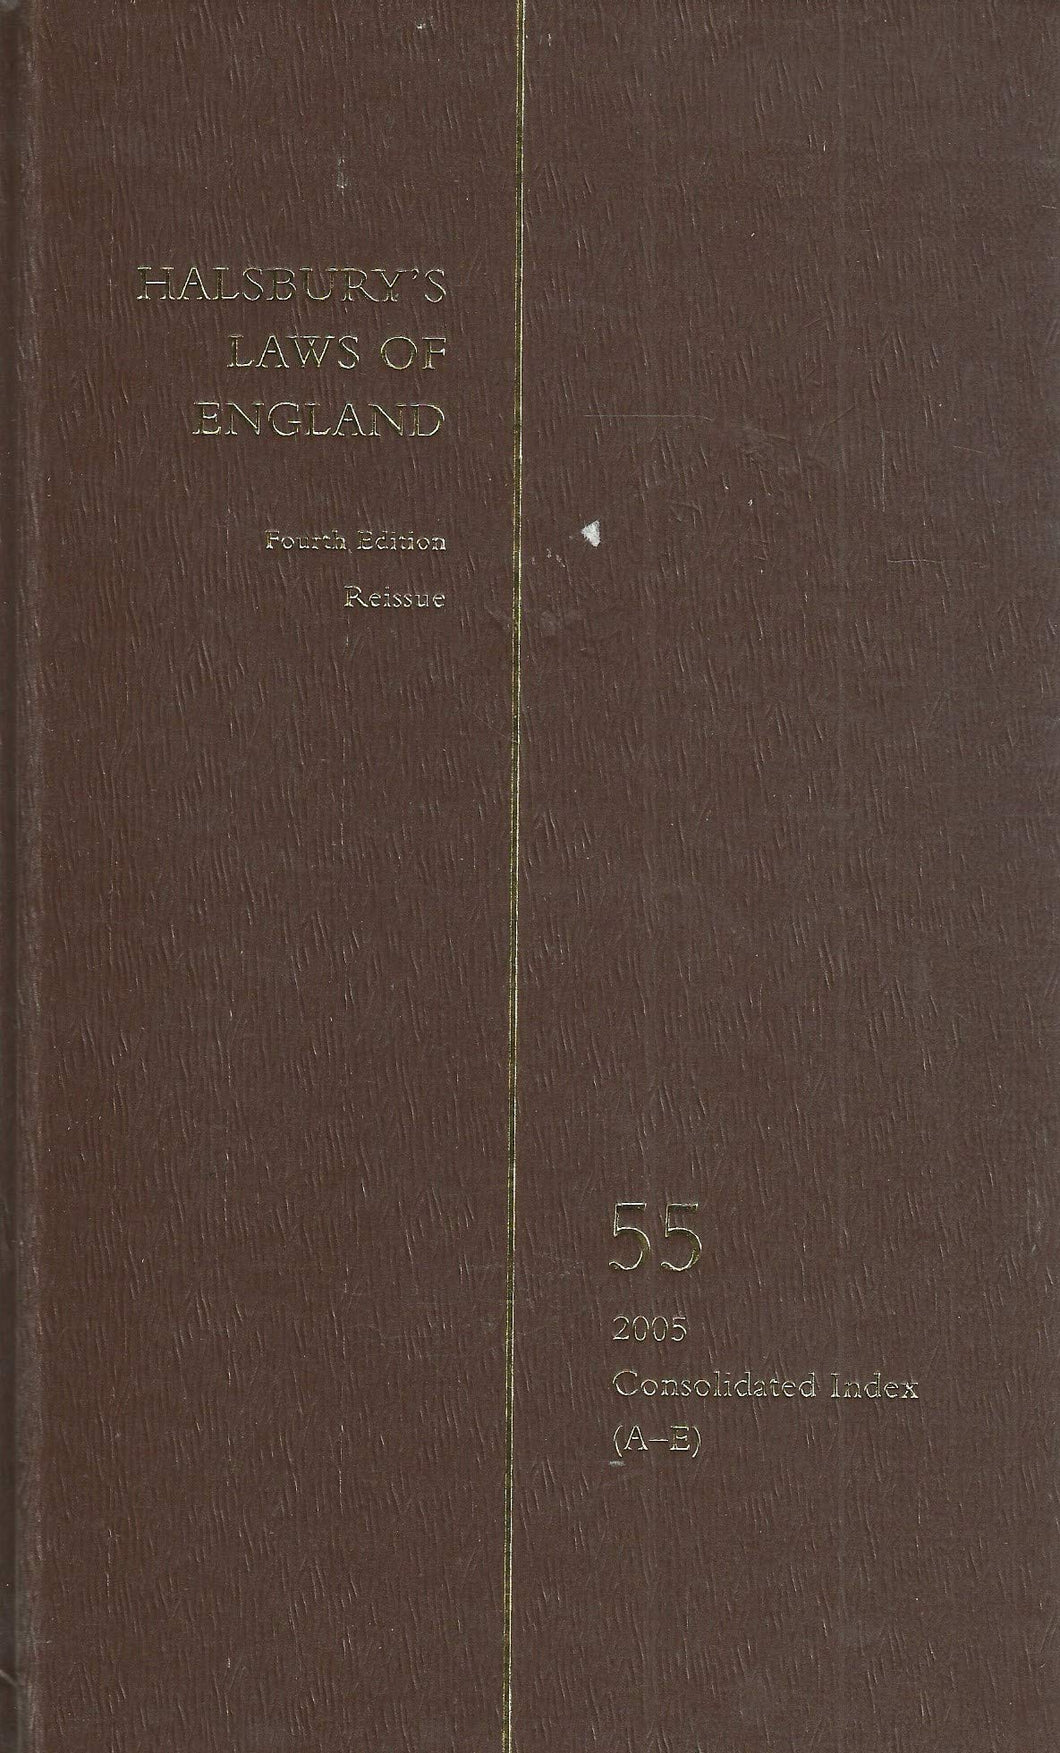 Halsbury's Laws Of England Fourth Edition Reissue Volume 55 2005 Consolidated Index (A-E)